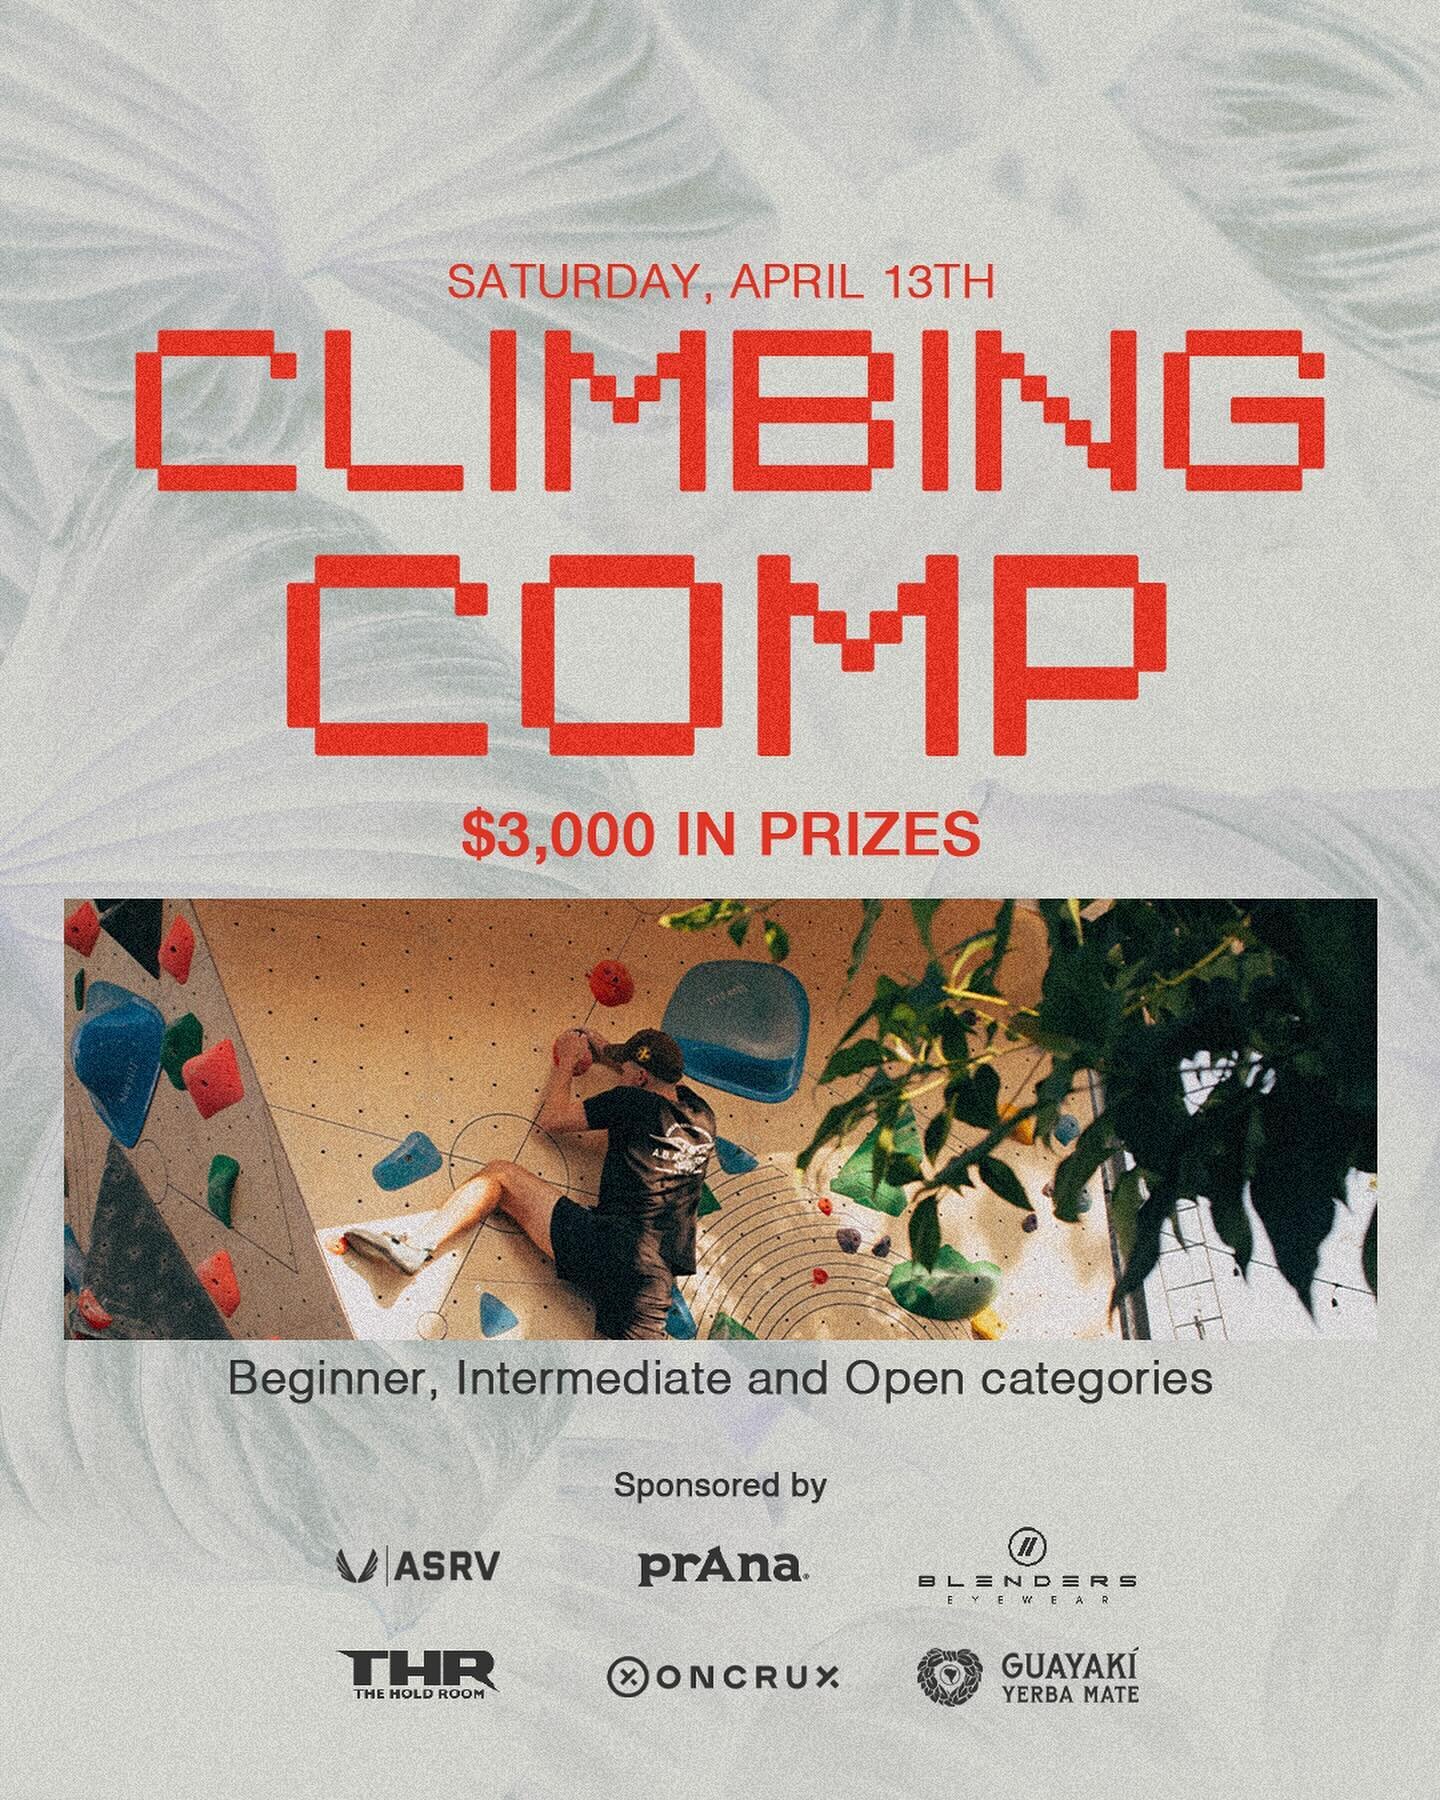 Join us on Saturday, April 13th for a competition to celebrate our 2nd Anniversary! We&rsquo;re hosting a competition for all levels with $3,000 in prizes up for grabs 🥇🥈🥉

The competition will be a modified redpoint round for Beginner and Interme